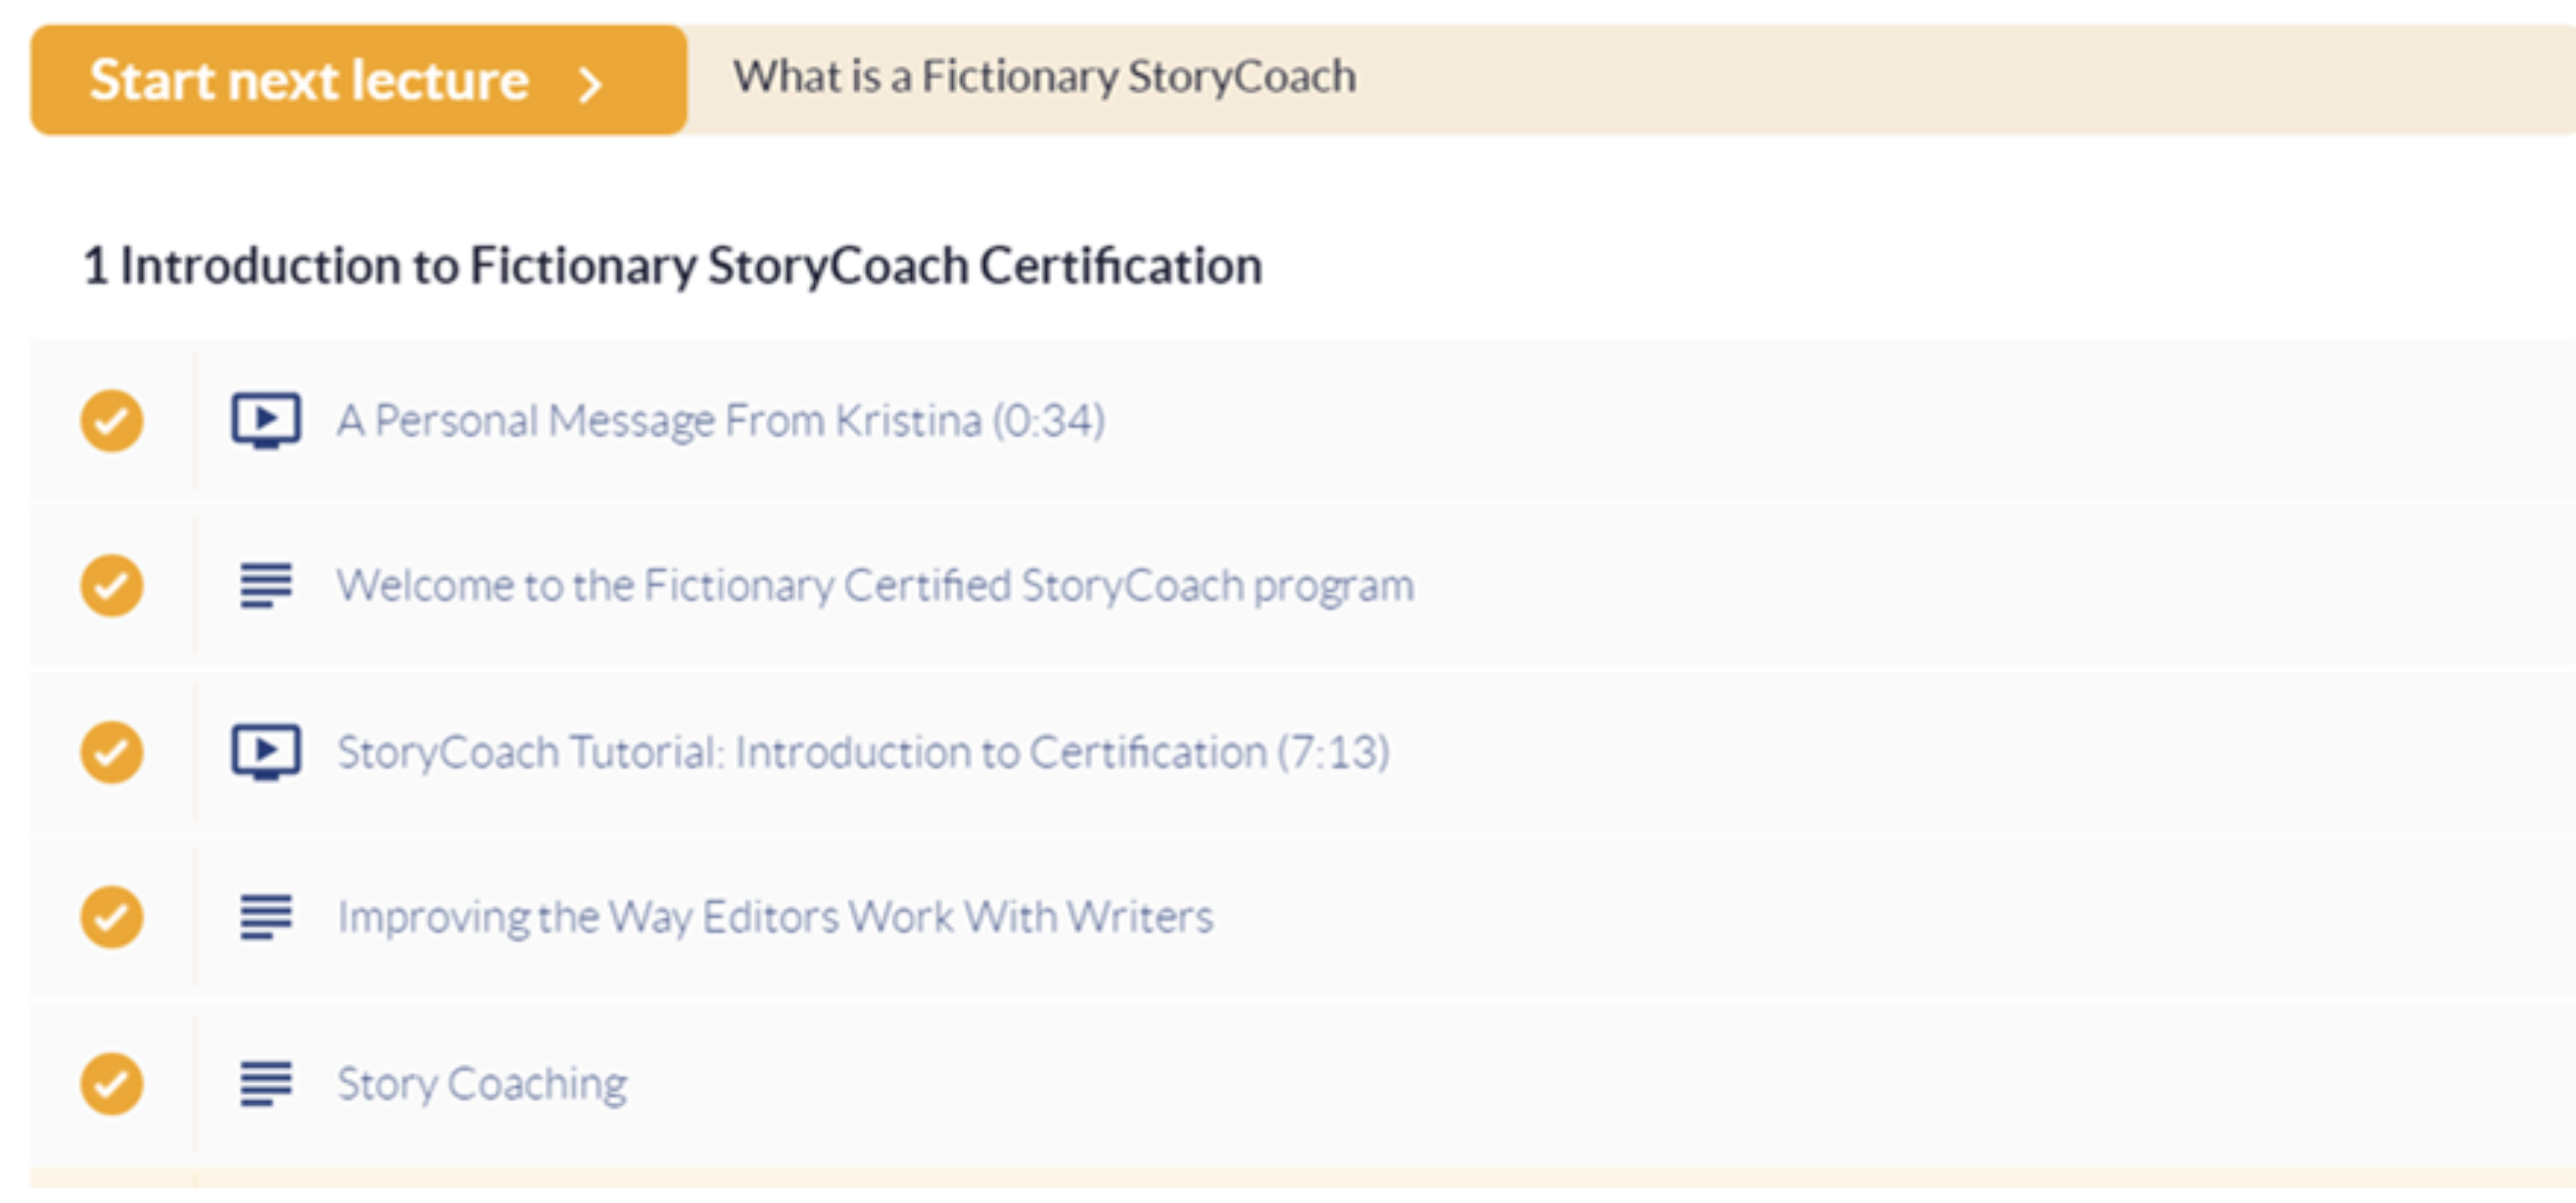 What is a Fictionary StoryCoach